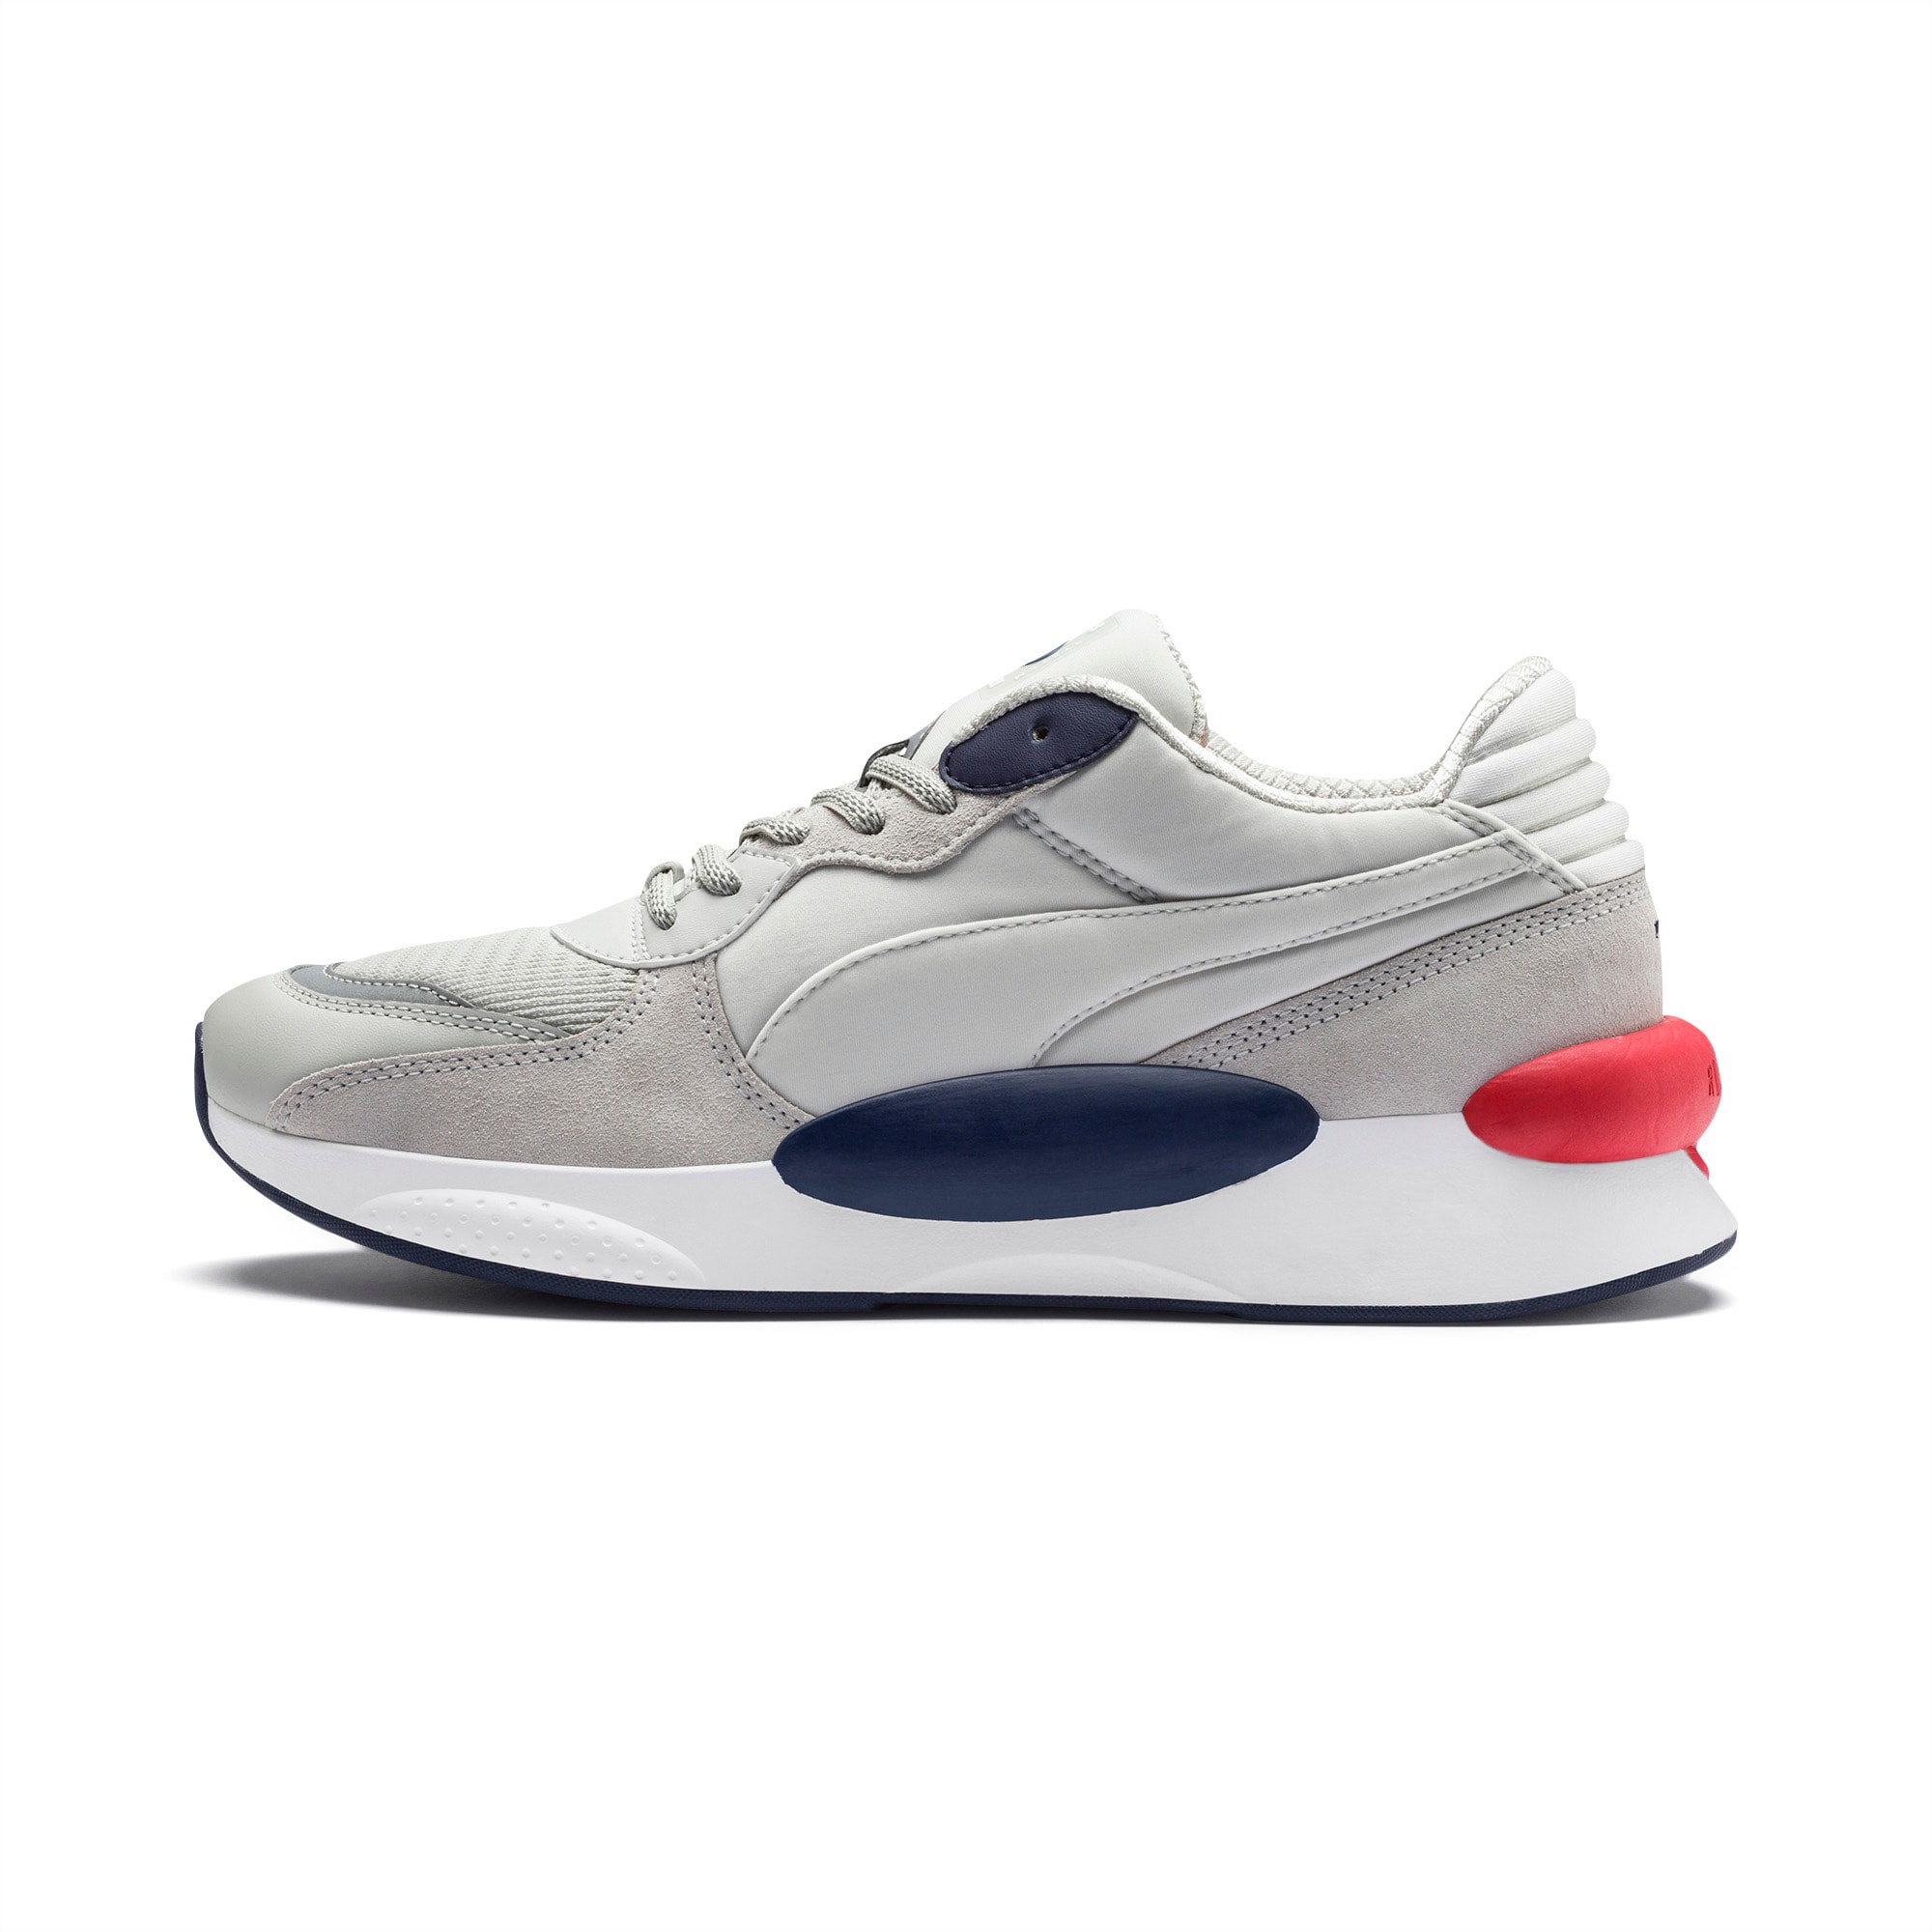 RS 9.8 Gravity Trainers | Gray Violet-Peacoat | PUMA Sneakers | PUMA